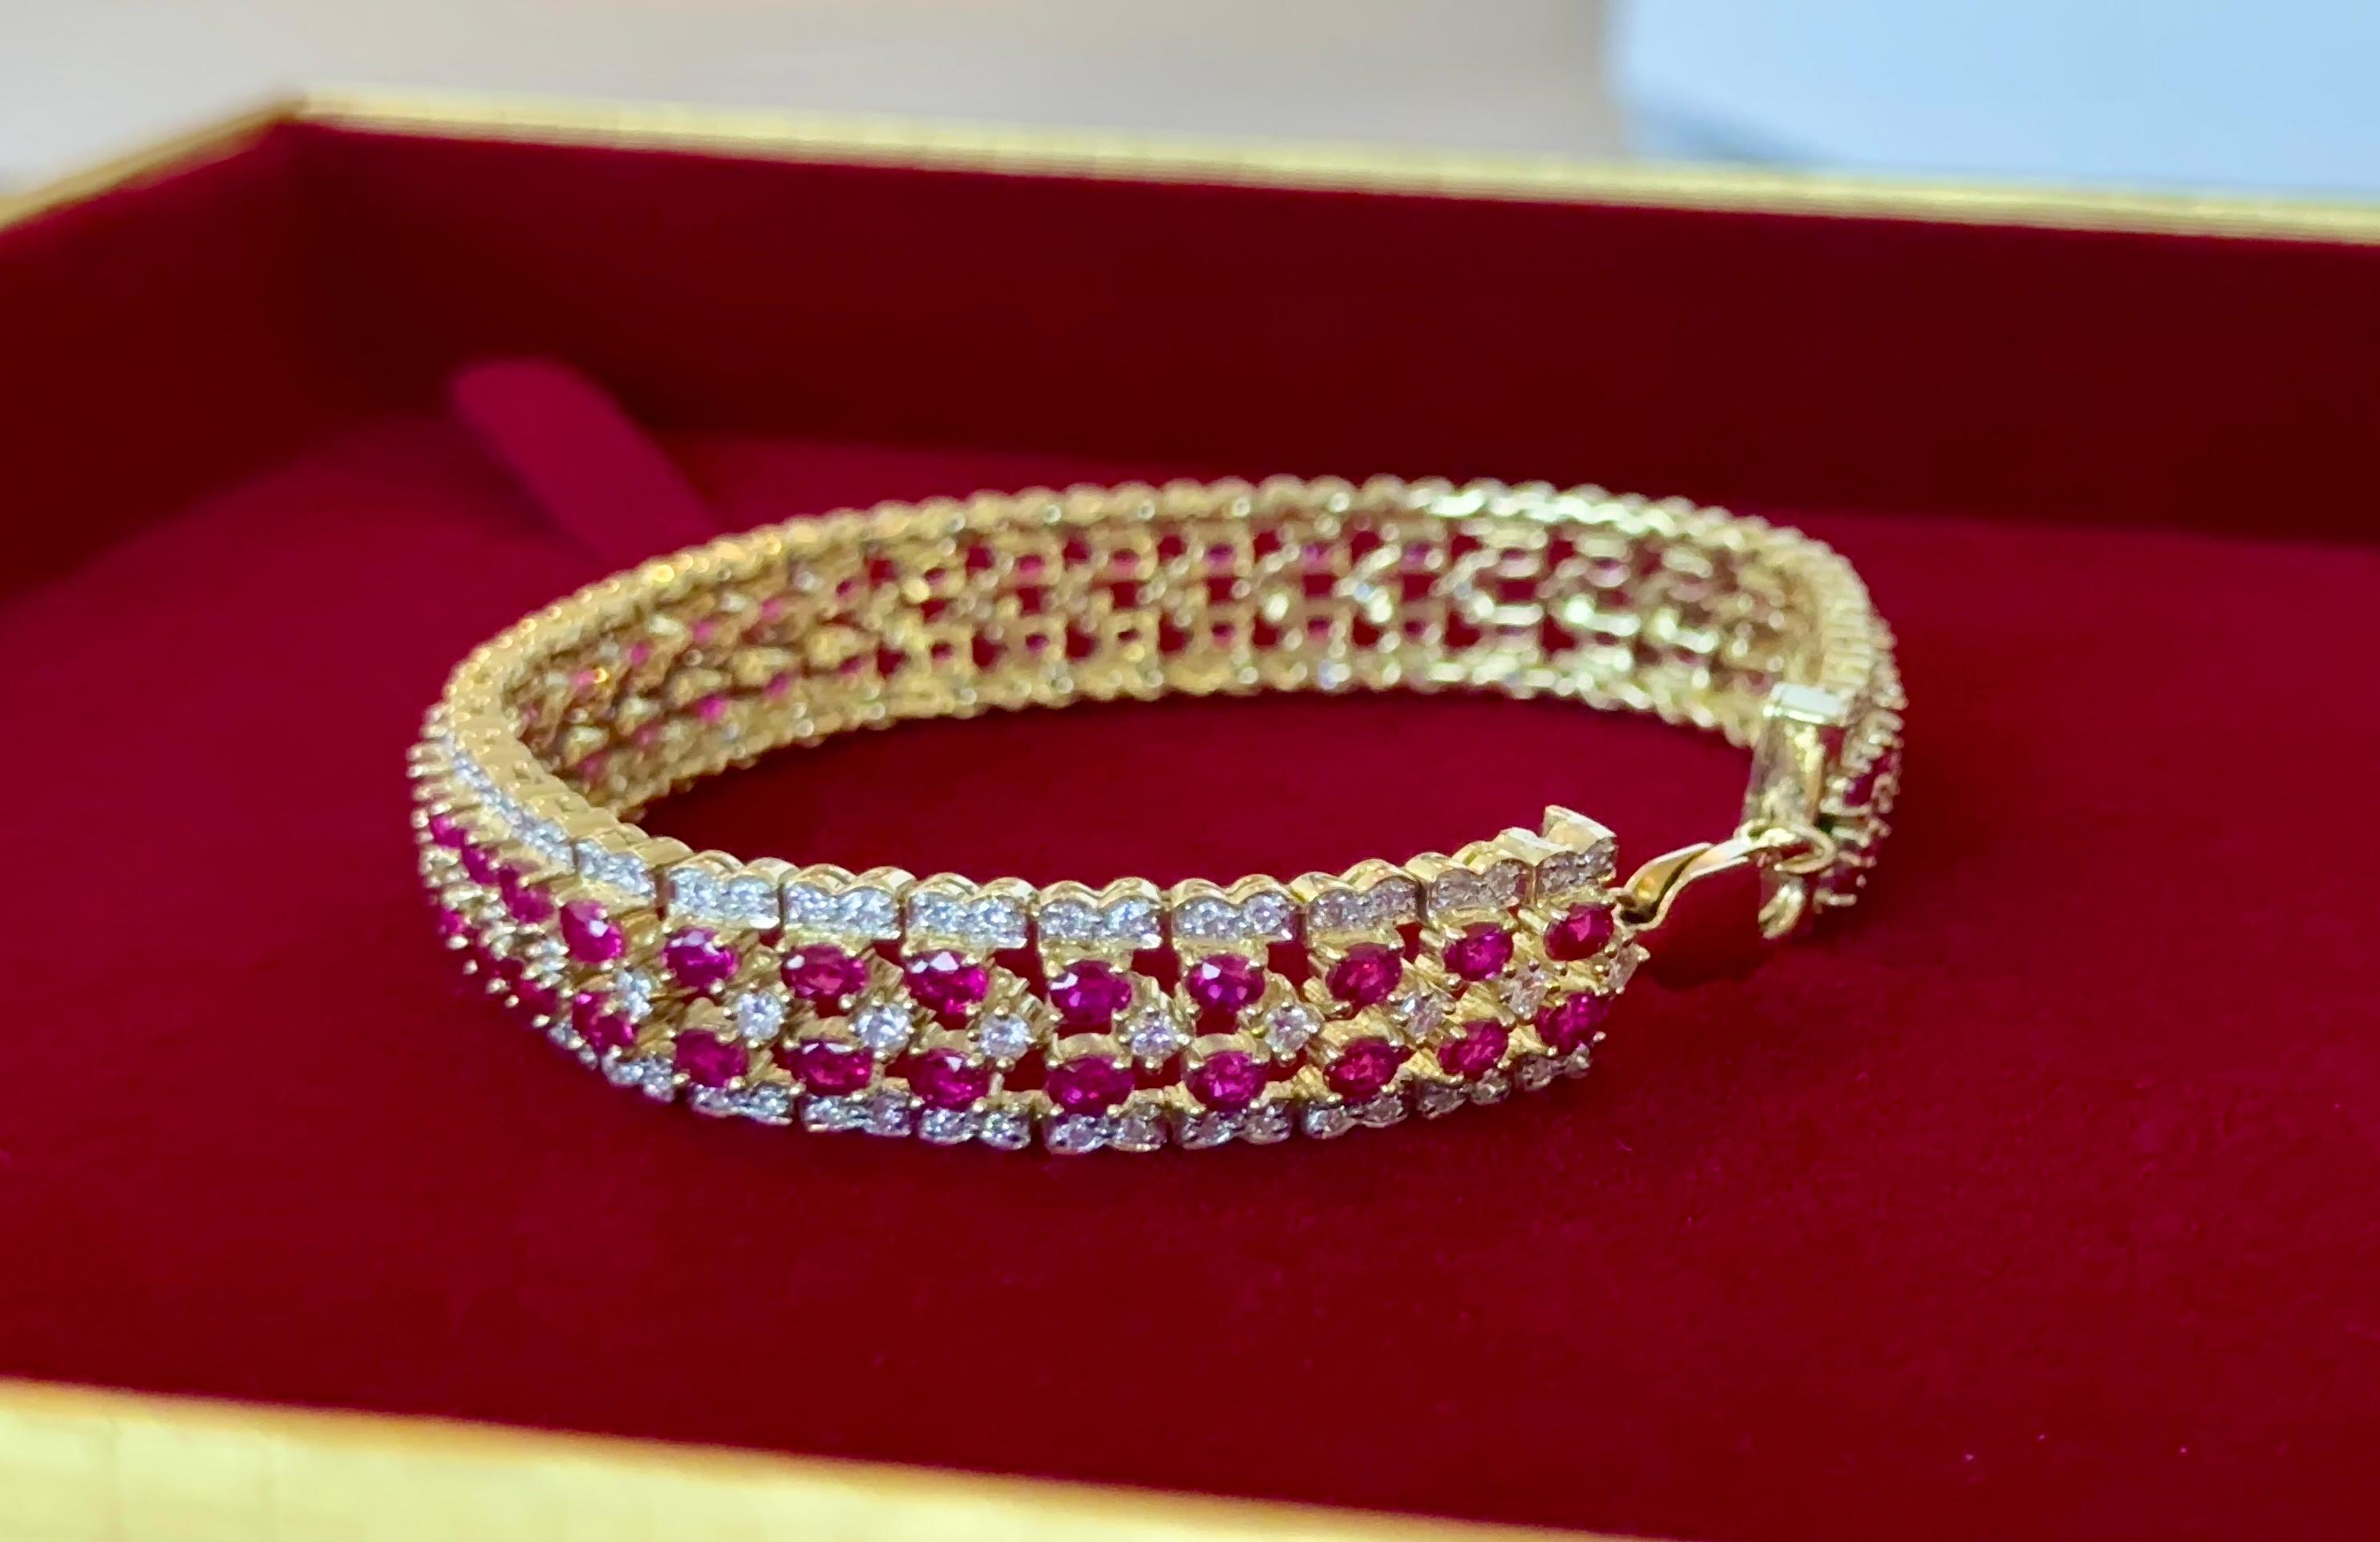 Metal: clap is 14K solid gold, the remaining is 18K solid gold. 
Bracelet length: 7 inches.
Natural Ruby weight: approx. 5.00 ctw.
Natural Diamond weight: approx. 2.5 ctw.
Diamond color: H-I.
Diamond clarity: SI1-SI2.
Total weight: 36.66 grams.